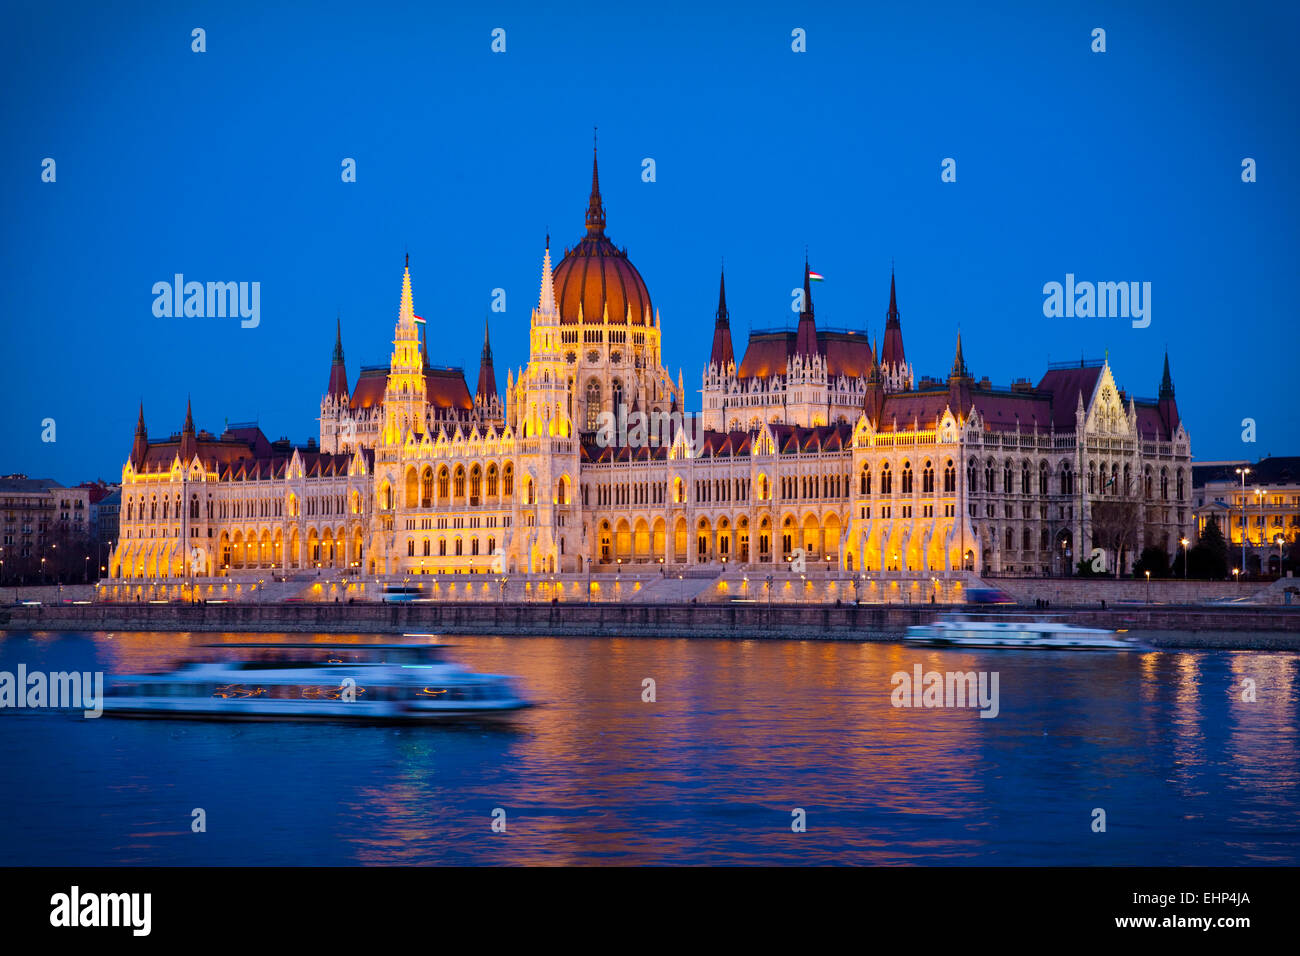 The Parliament Building seen from across the Danube River, Budapest, Hungary Stock Photo